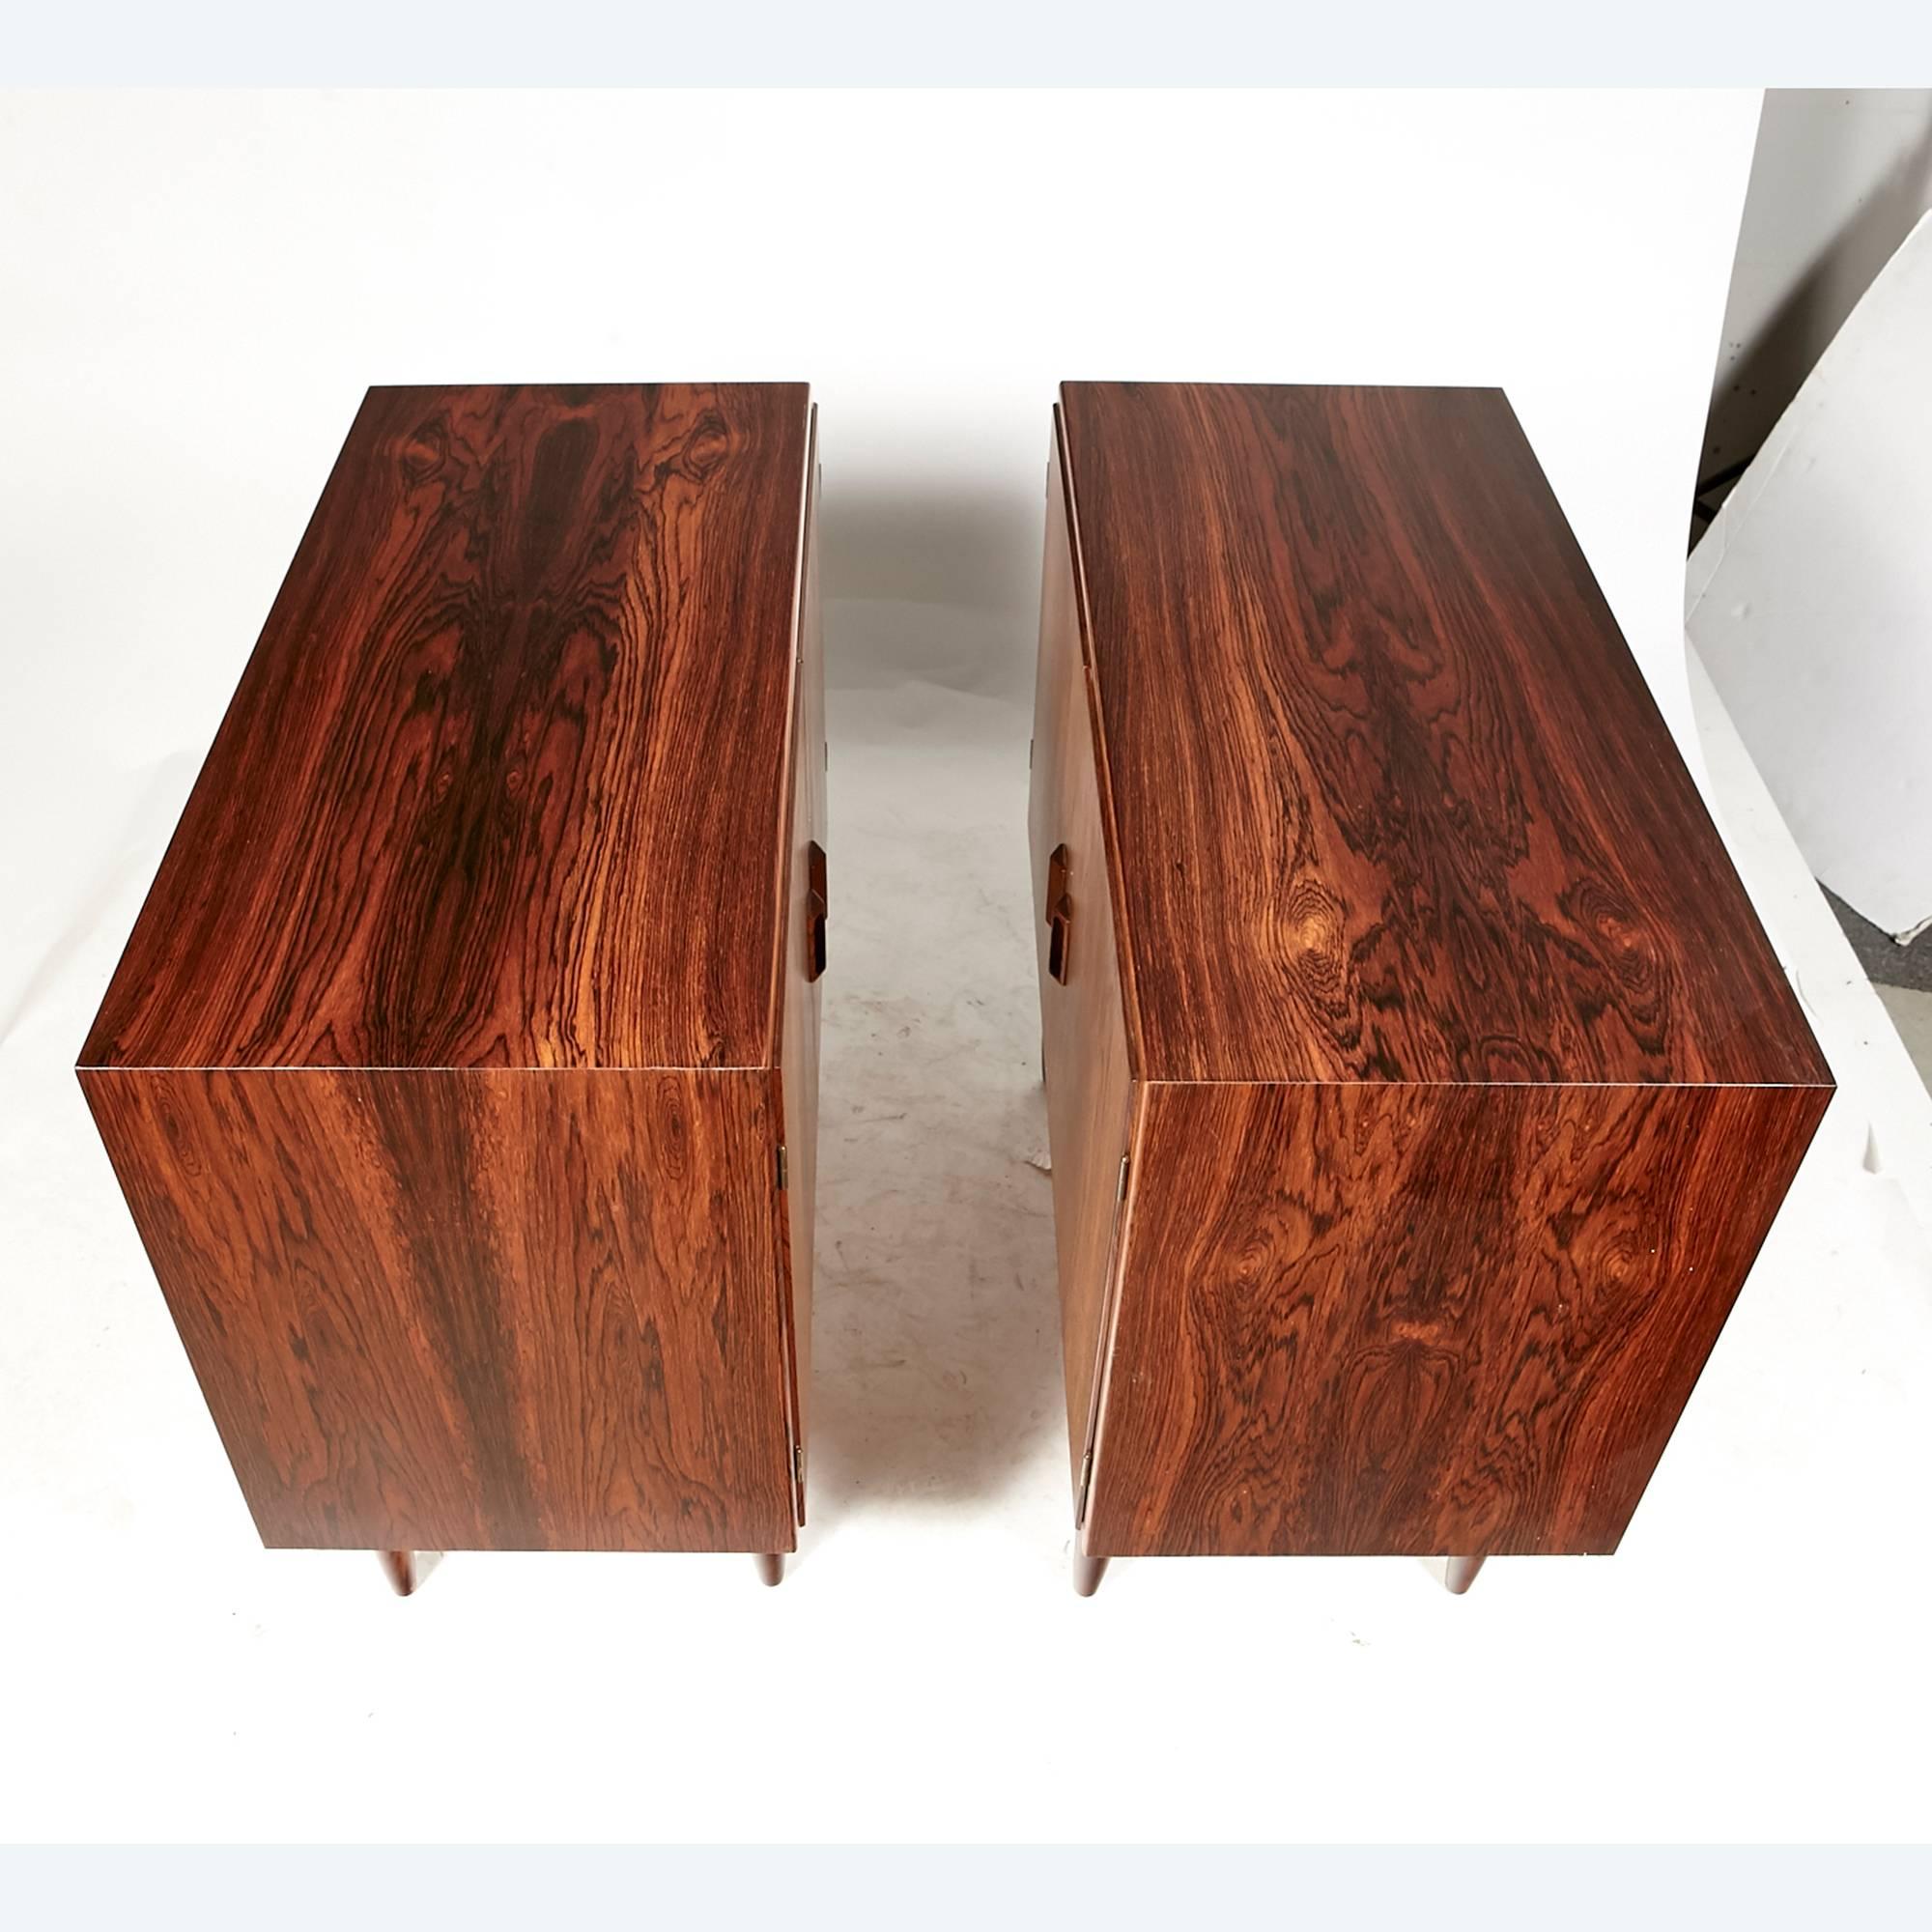 20th Century Danish Borge Mogensen Rosewood Pair of Cabinets, 1960s For Sale